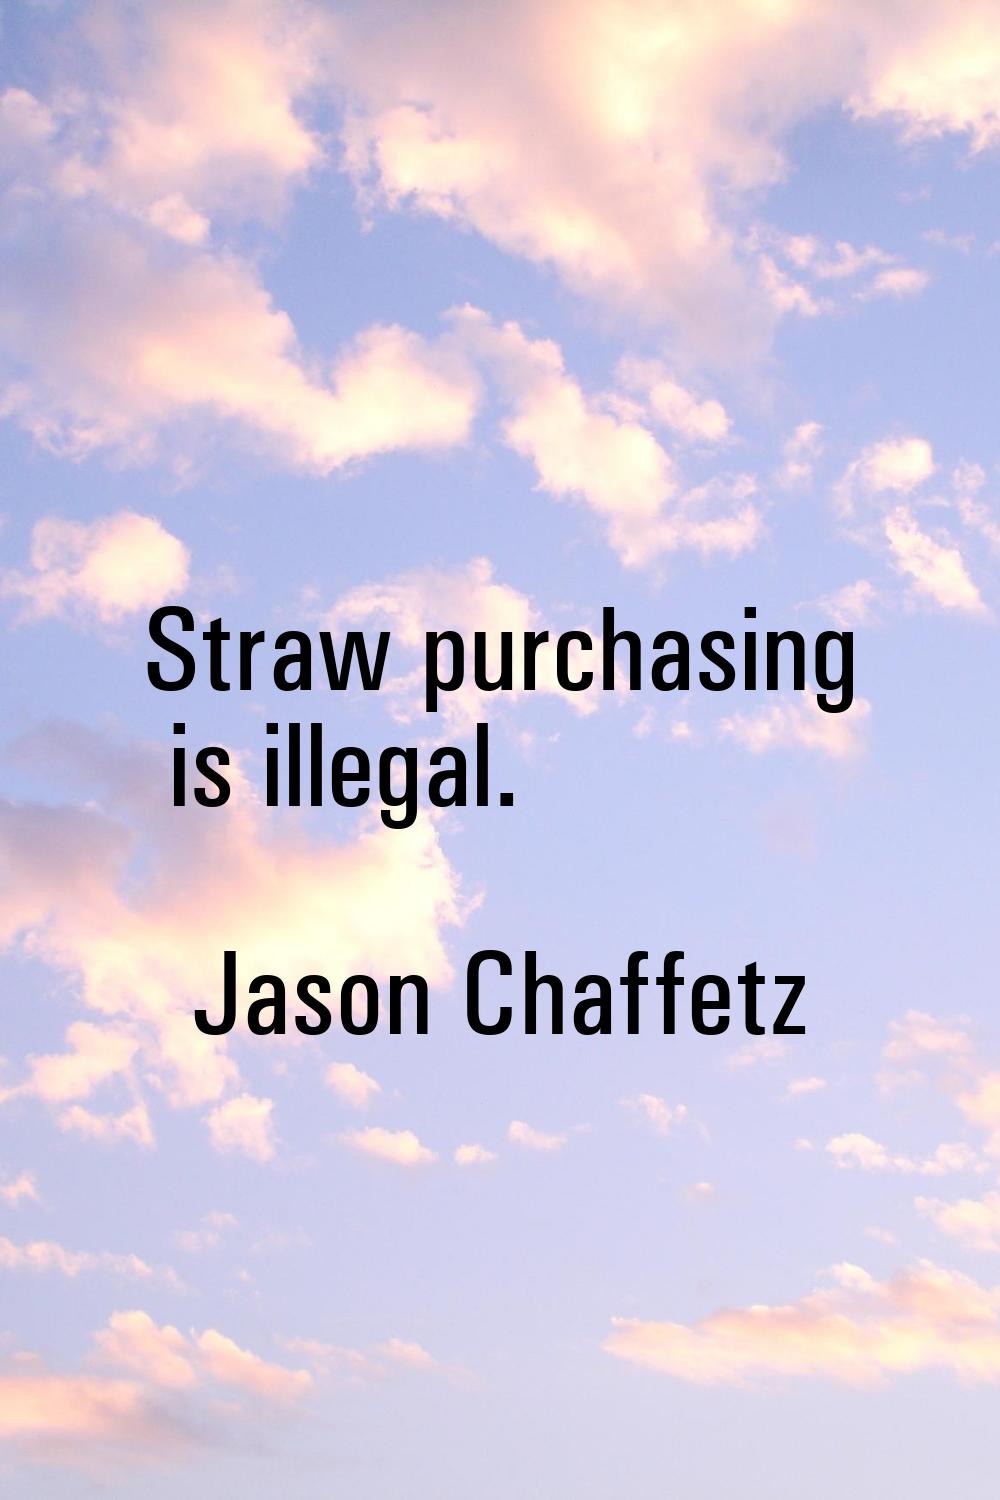 Straw purchasing is illegal.